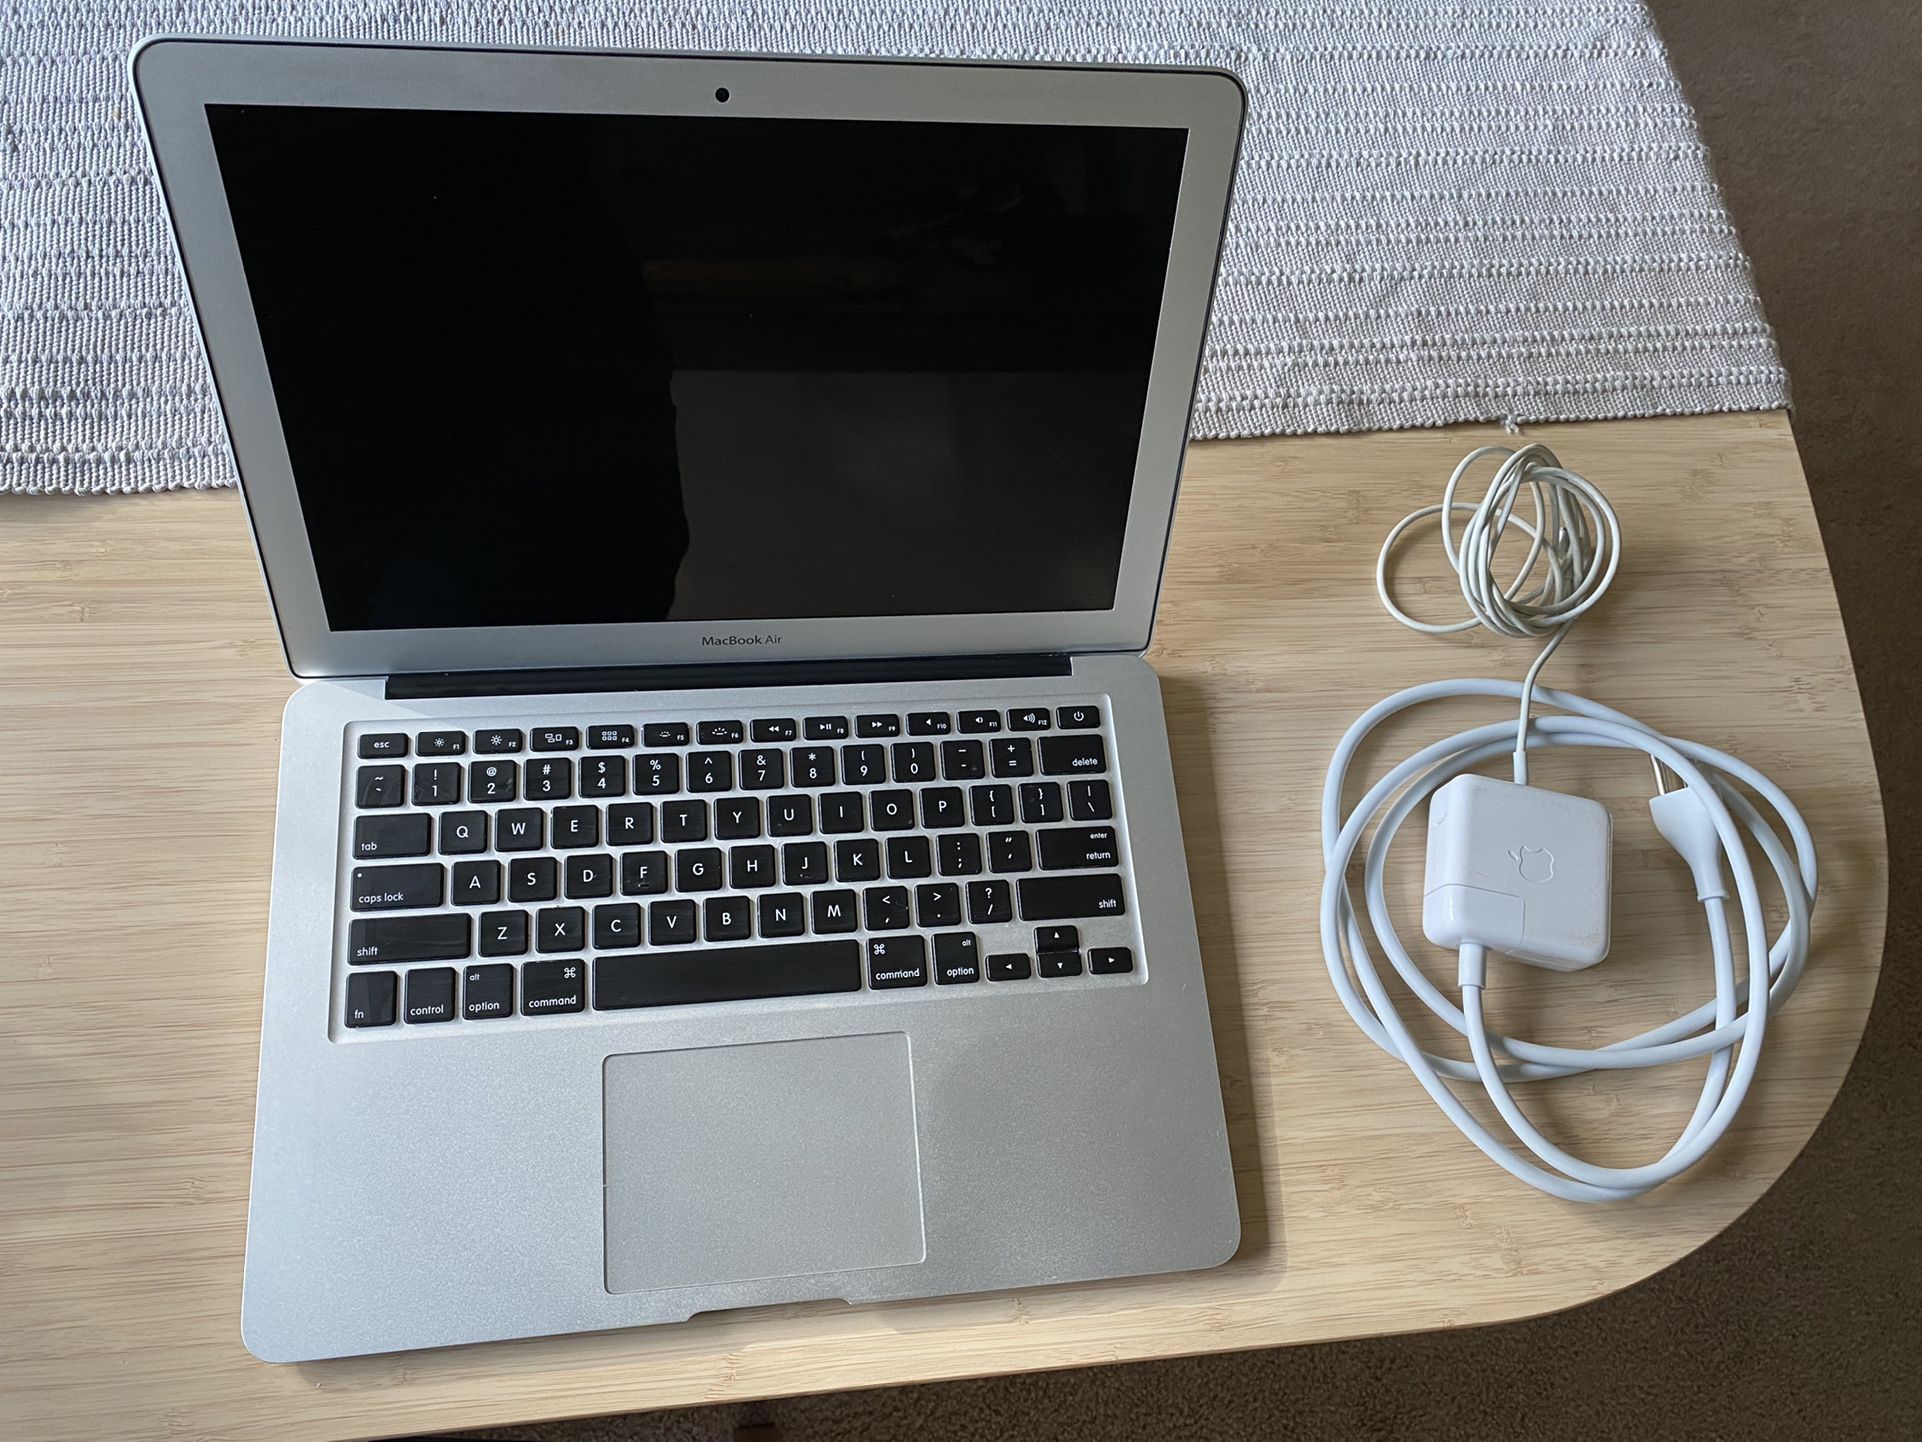 Apple MacBook Air 13.3-Inch Laptop, GREAT CONDITION 4GB Ram - 1600 MHz DDR3 - 1.4 GHz Intel i5 Dual Core - Intel HD Graphics 5000 1536 MB